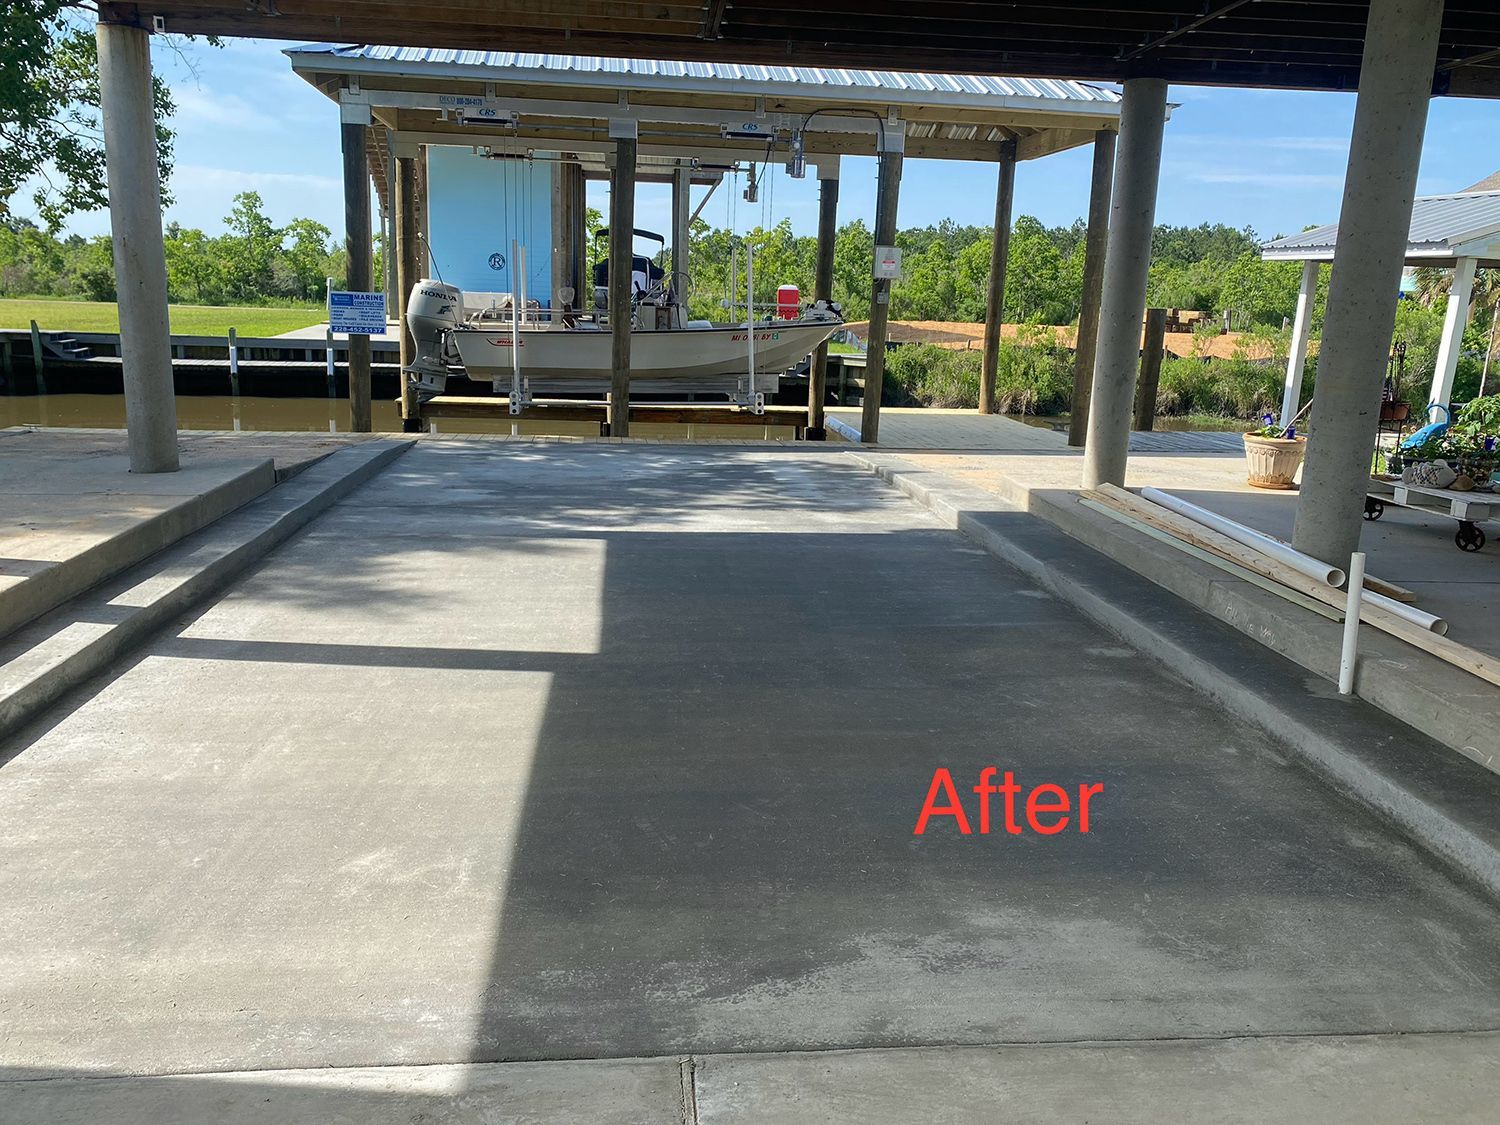 A picture of a boat dock after being remodeled